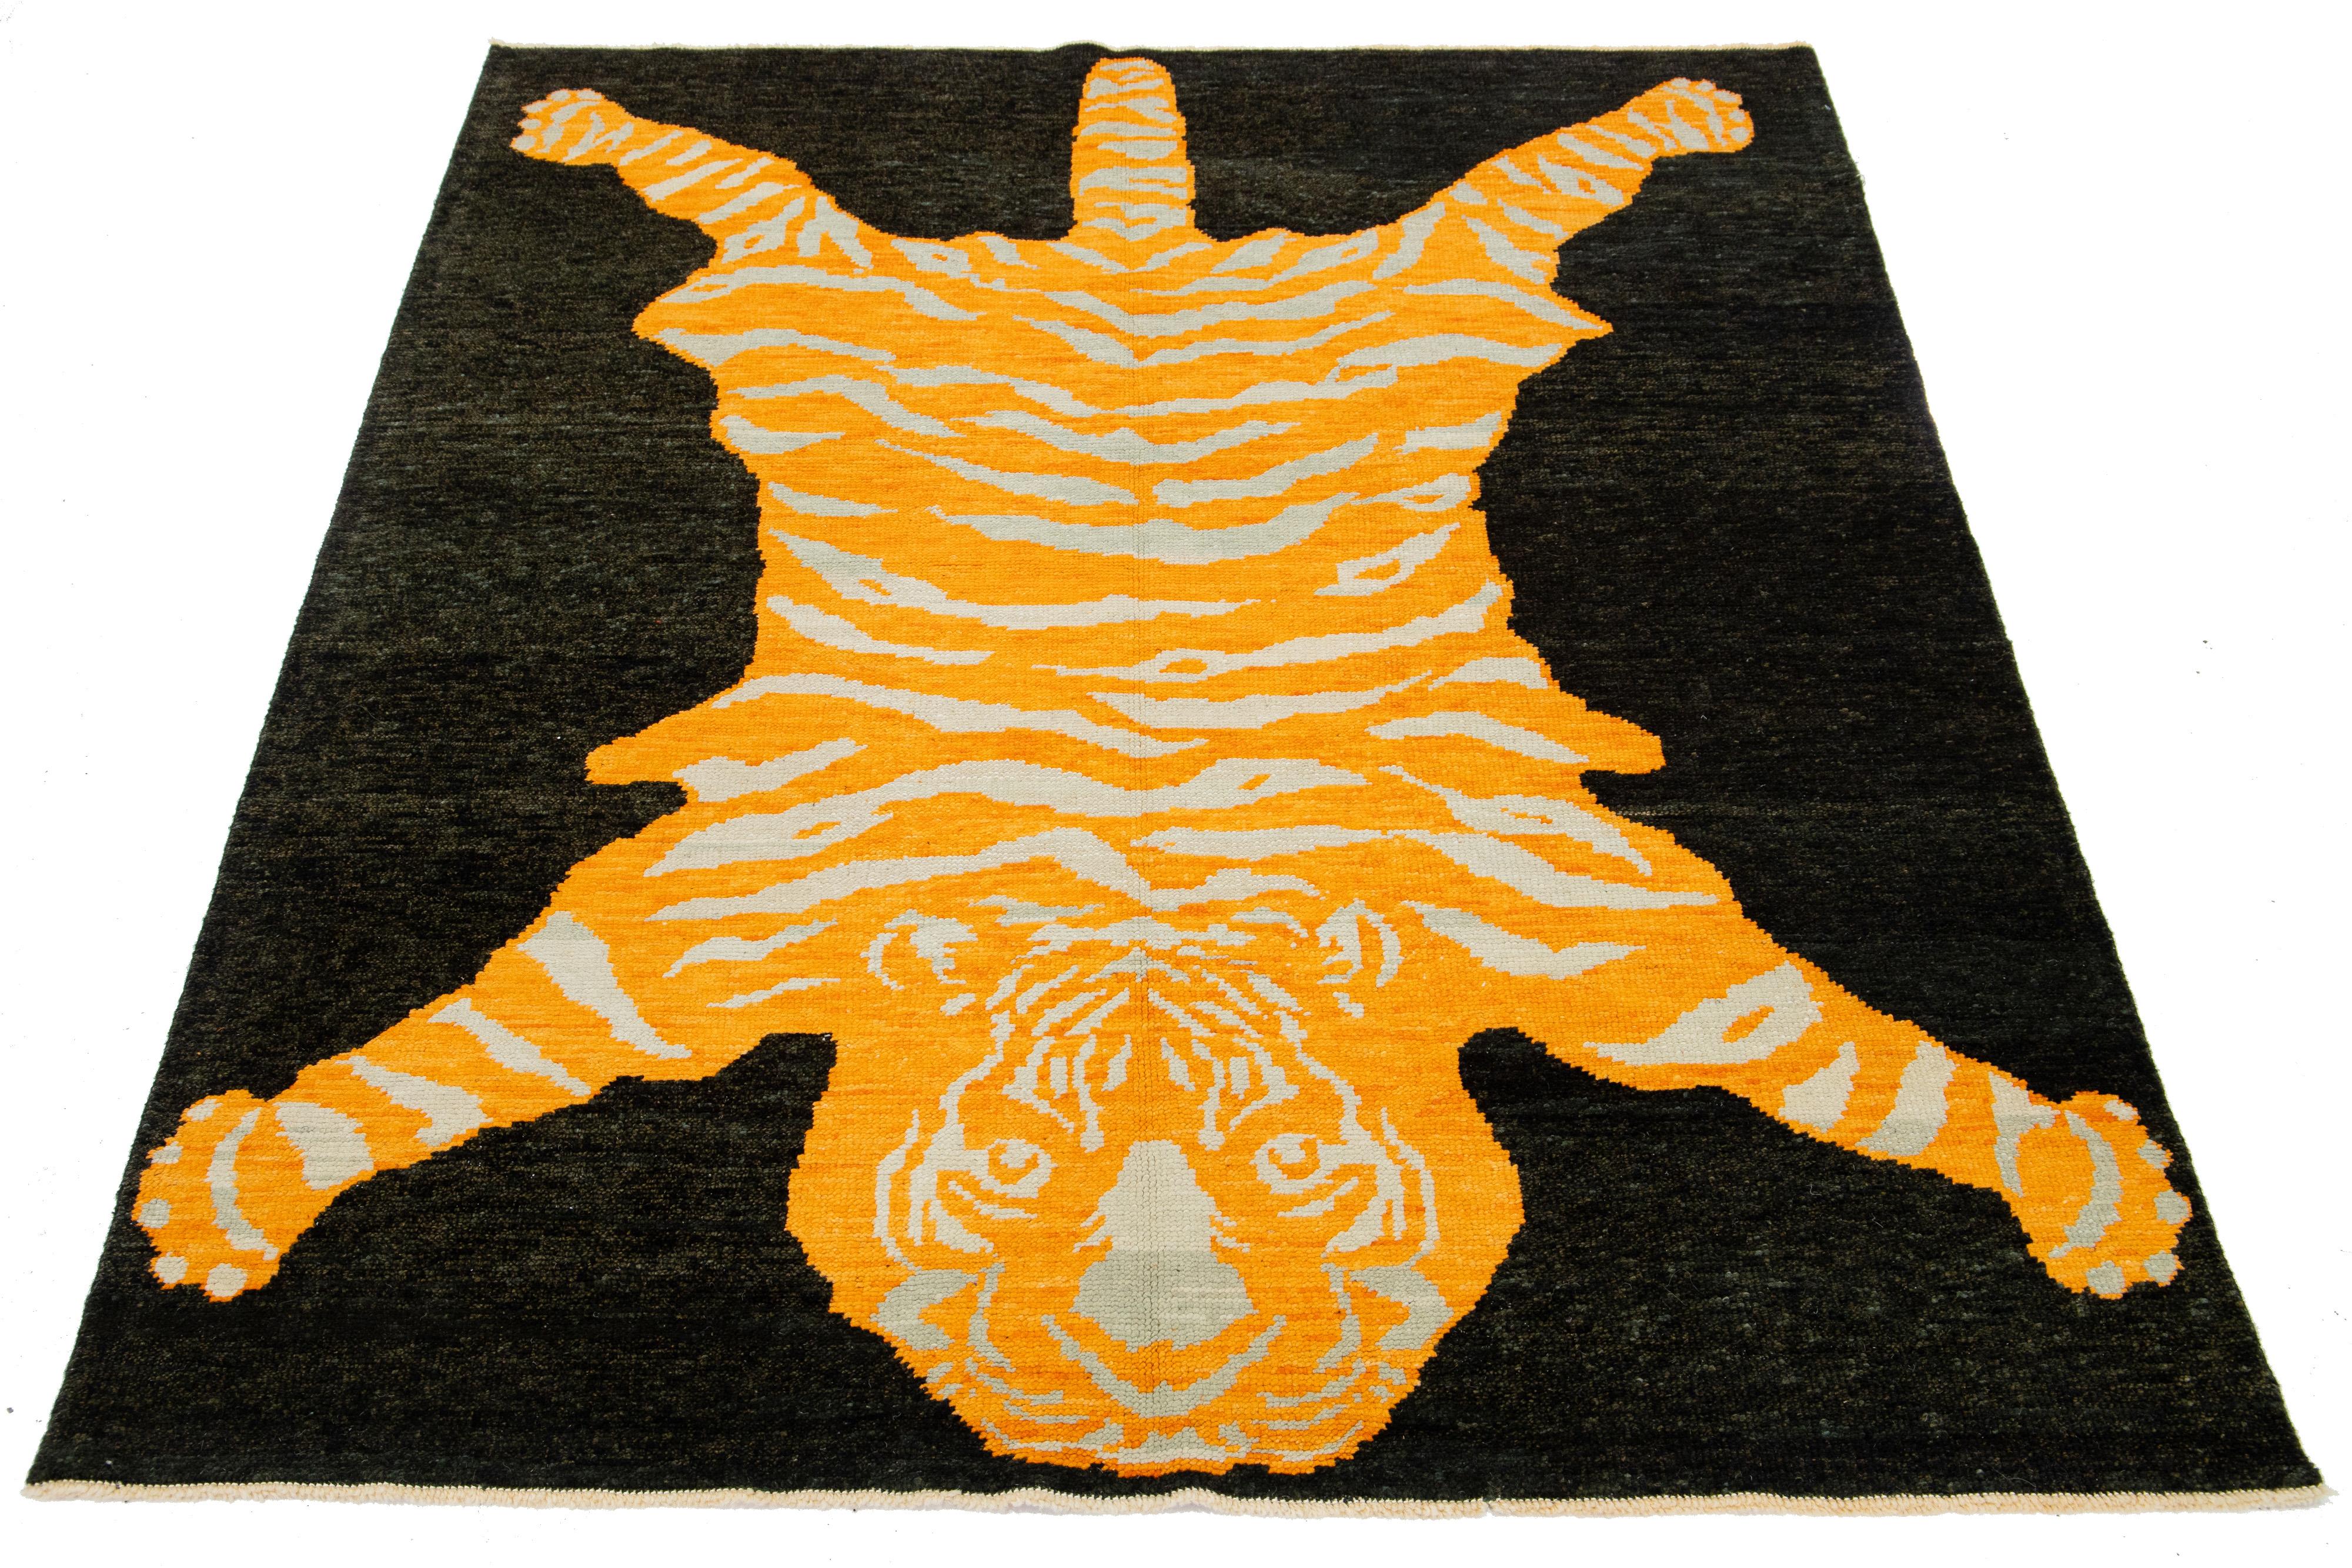 This beautiful Turkish Art Deco wool rug features a black field with orange and beige accents, depicting a stunning tiger pictorial design.

This rug measures 6'1